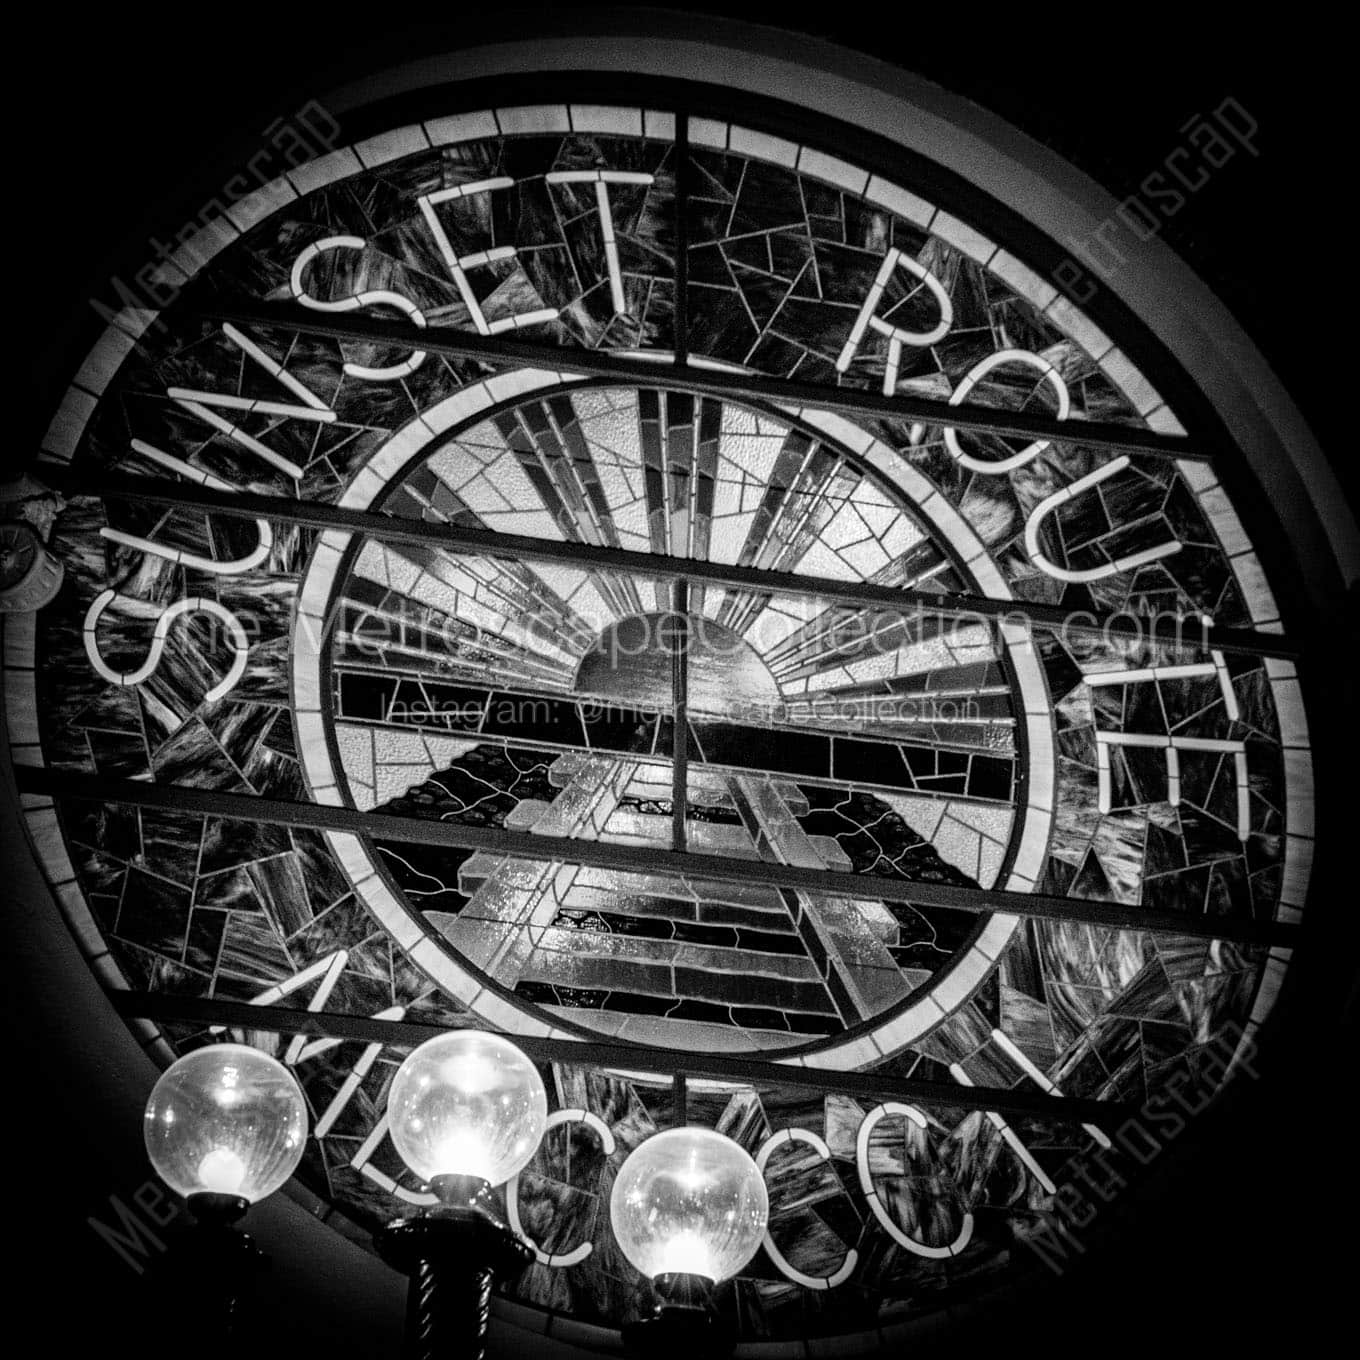 sunset route train station stained glass Black & White Office Art